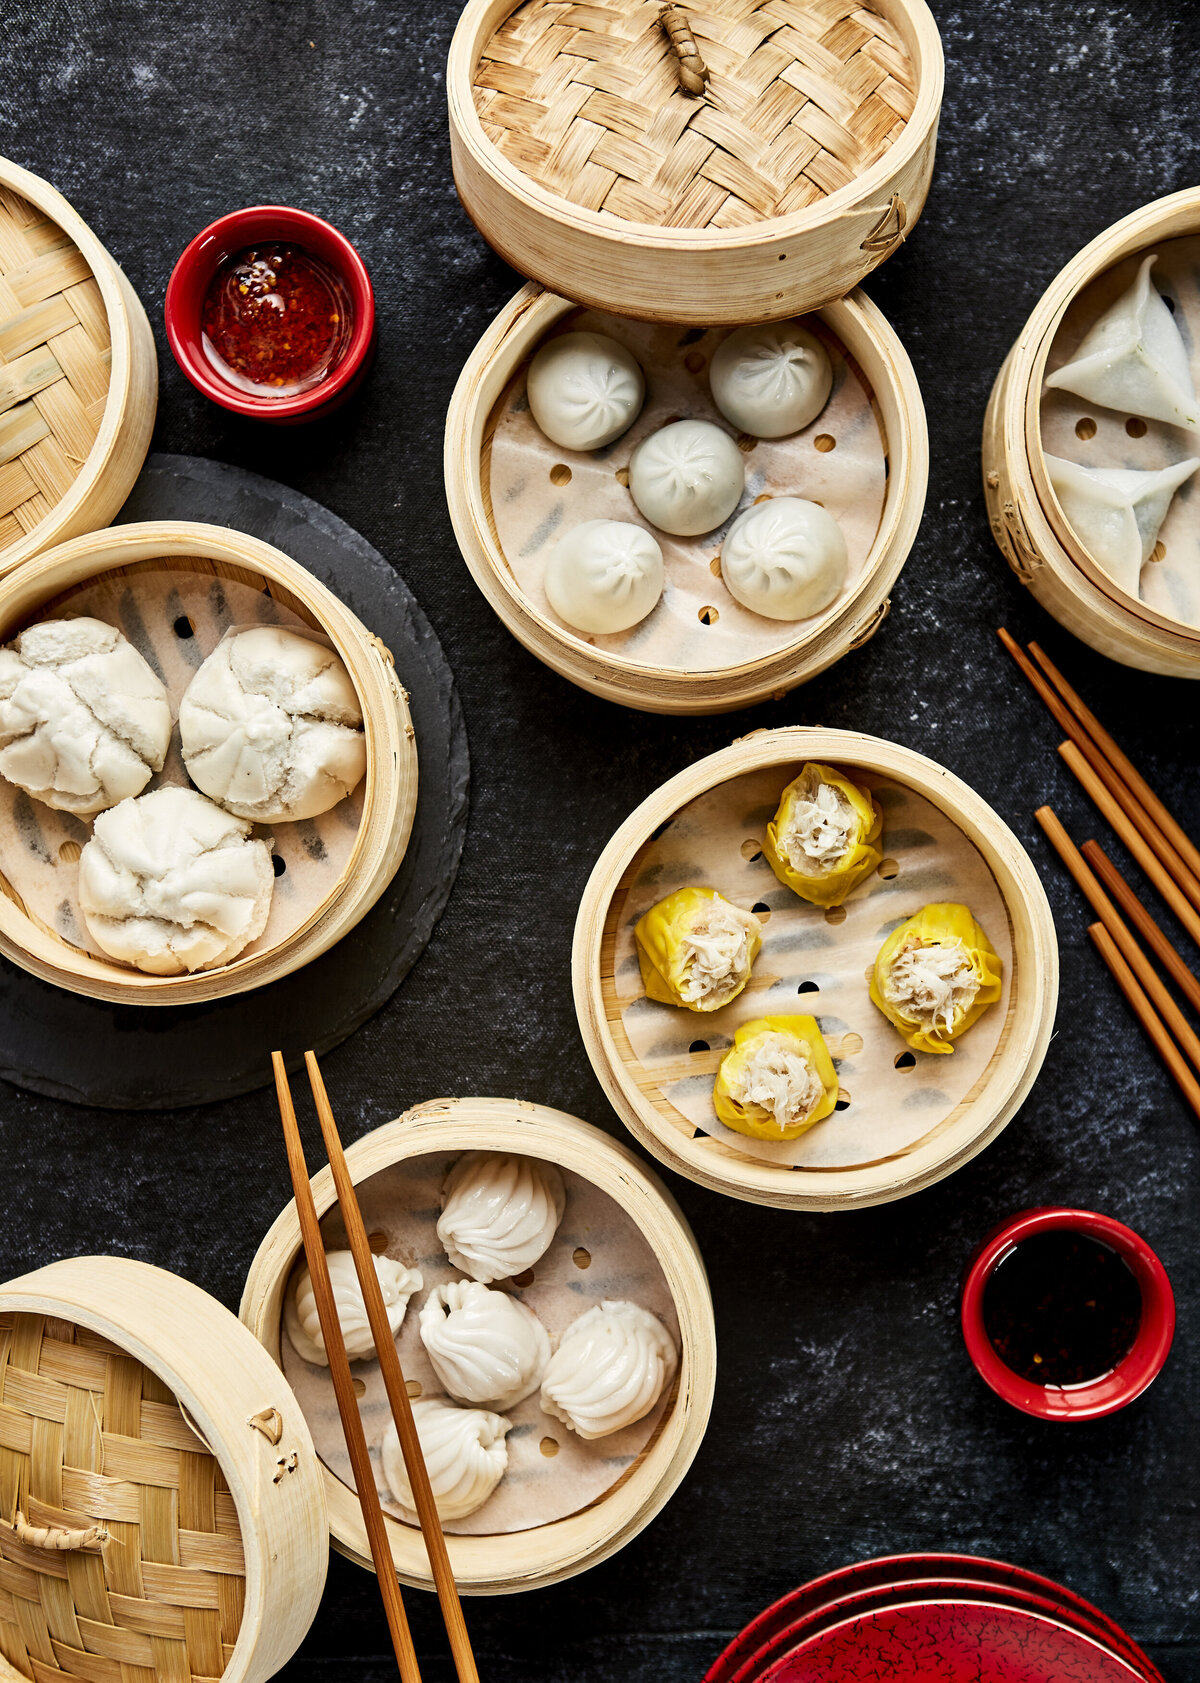 A few steaming baskets with various dumplings in them.